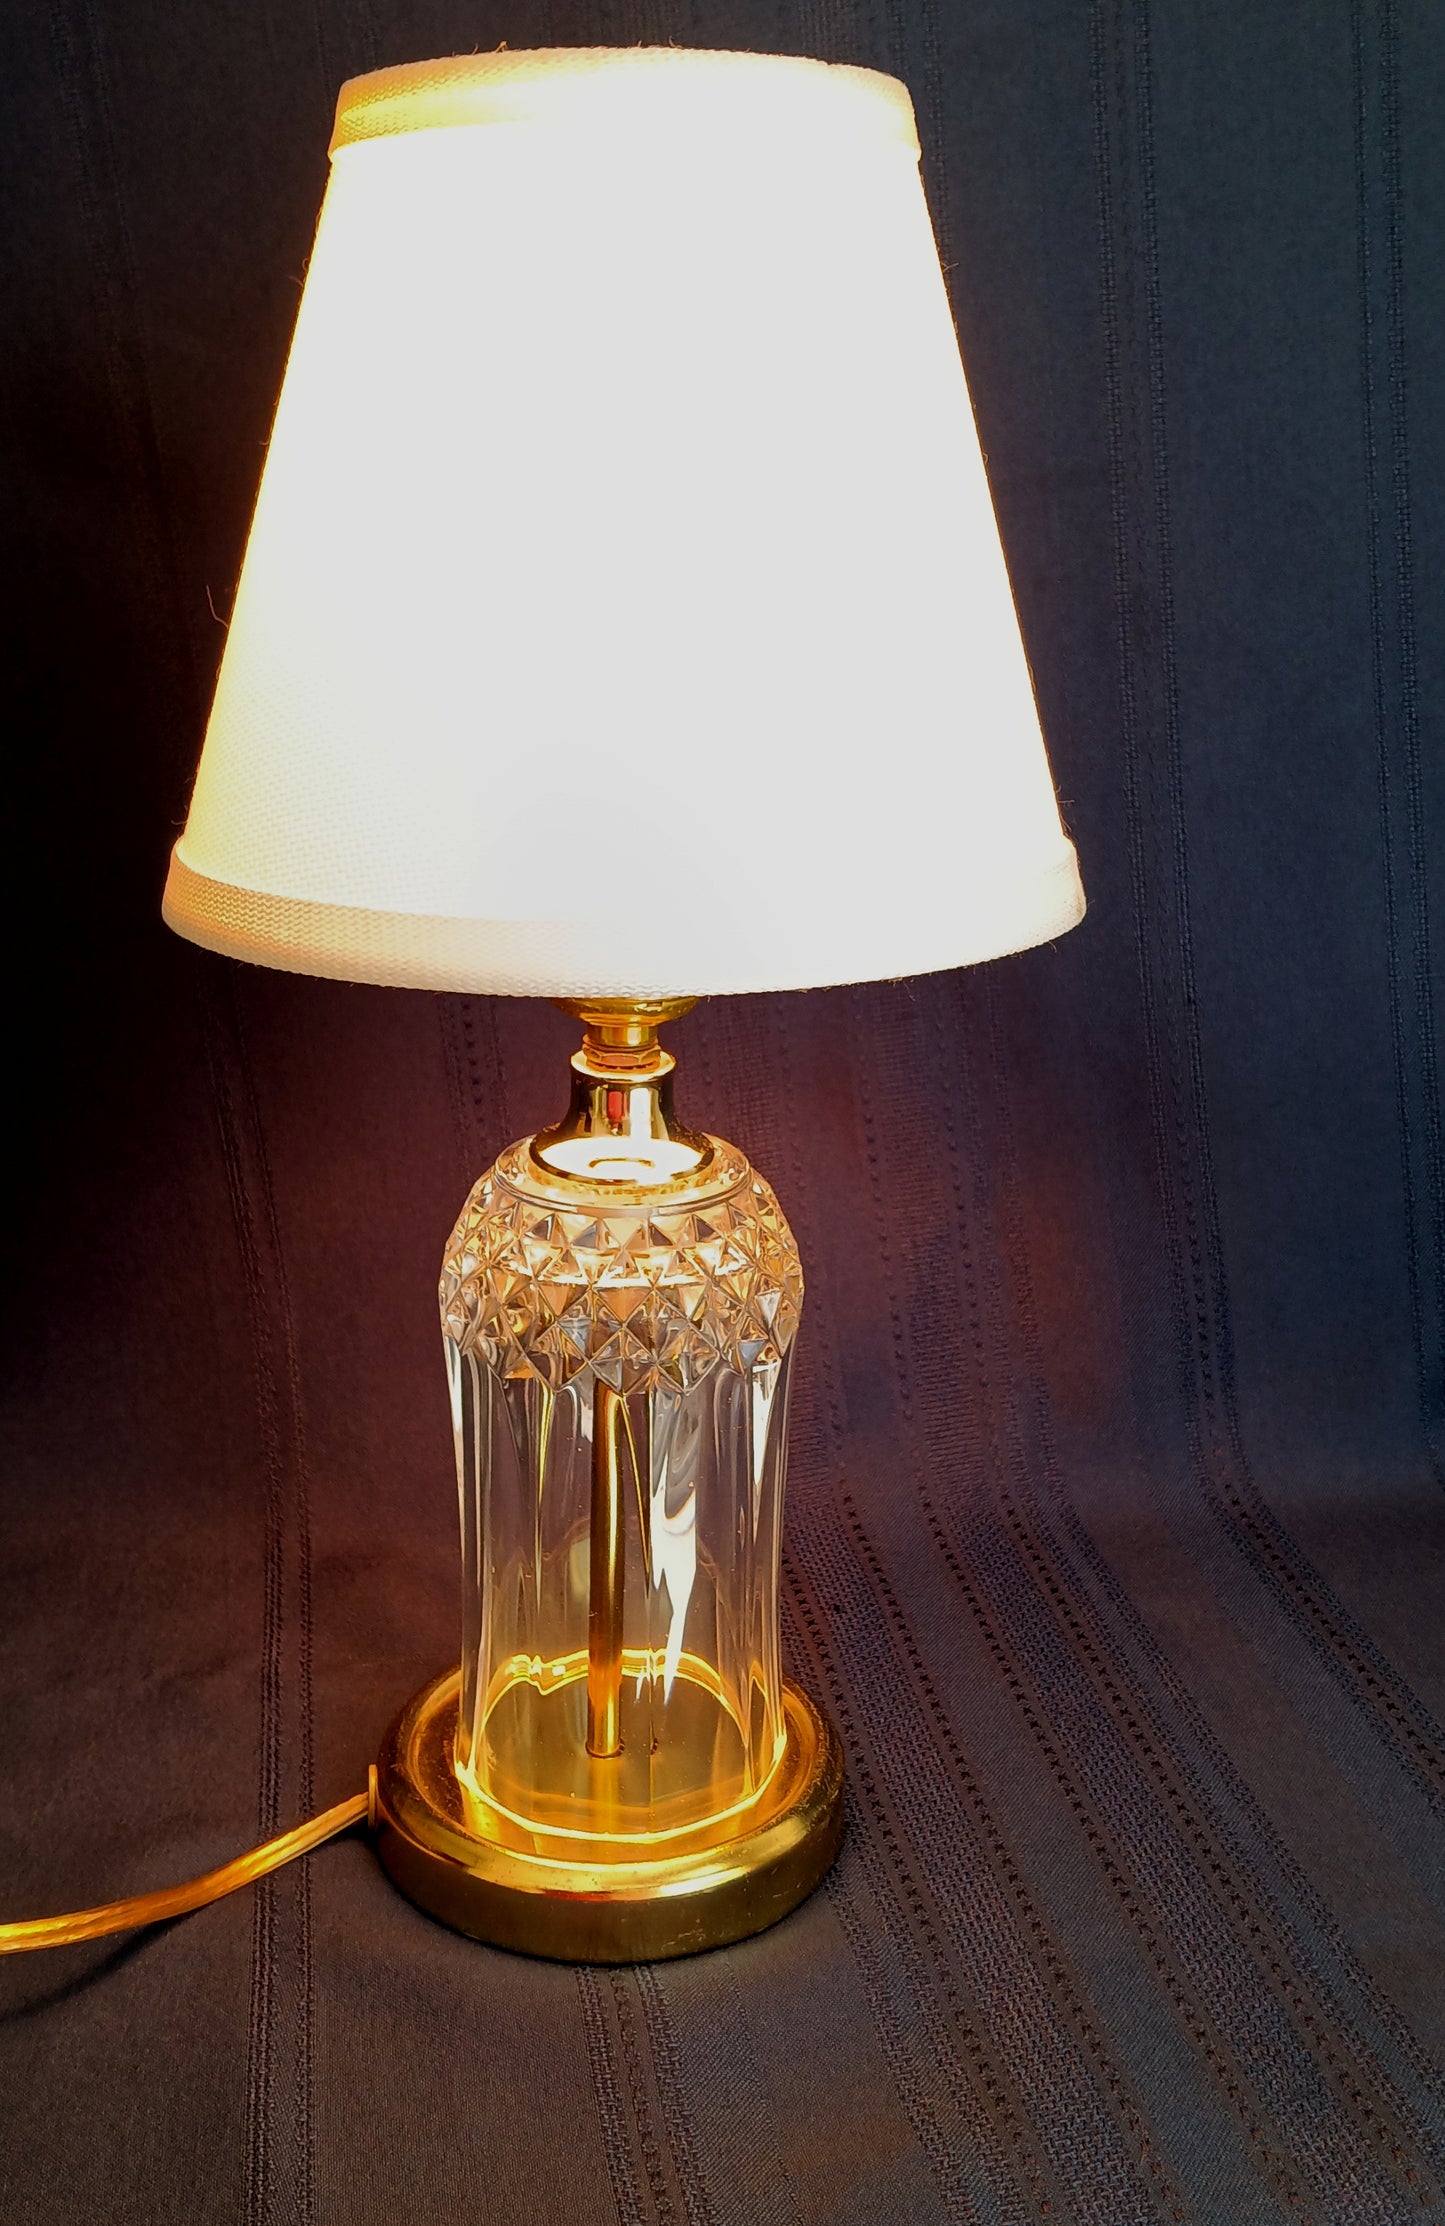 Vintage Small Electric Lamp Clear Crystal Pressed Glass Brass Geometric Diamond Design Dresser Side End Table Accent Lamp